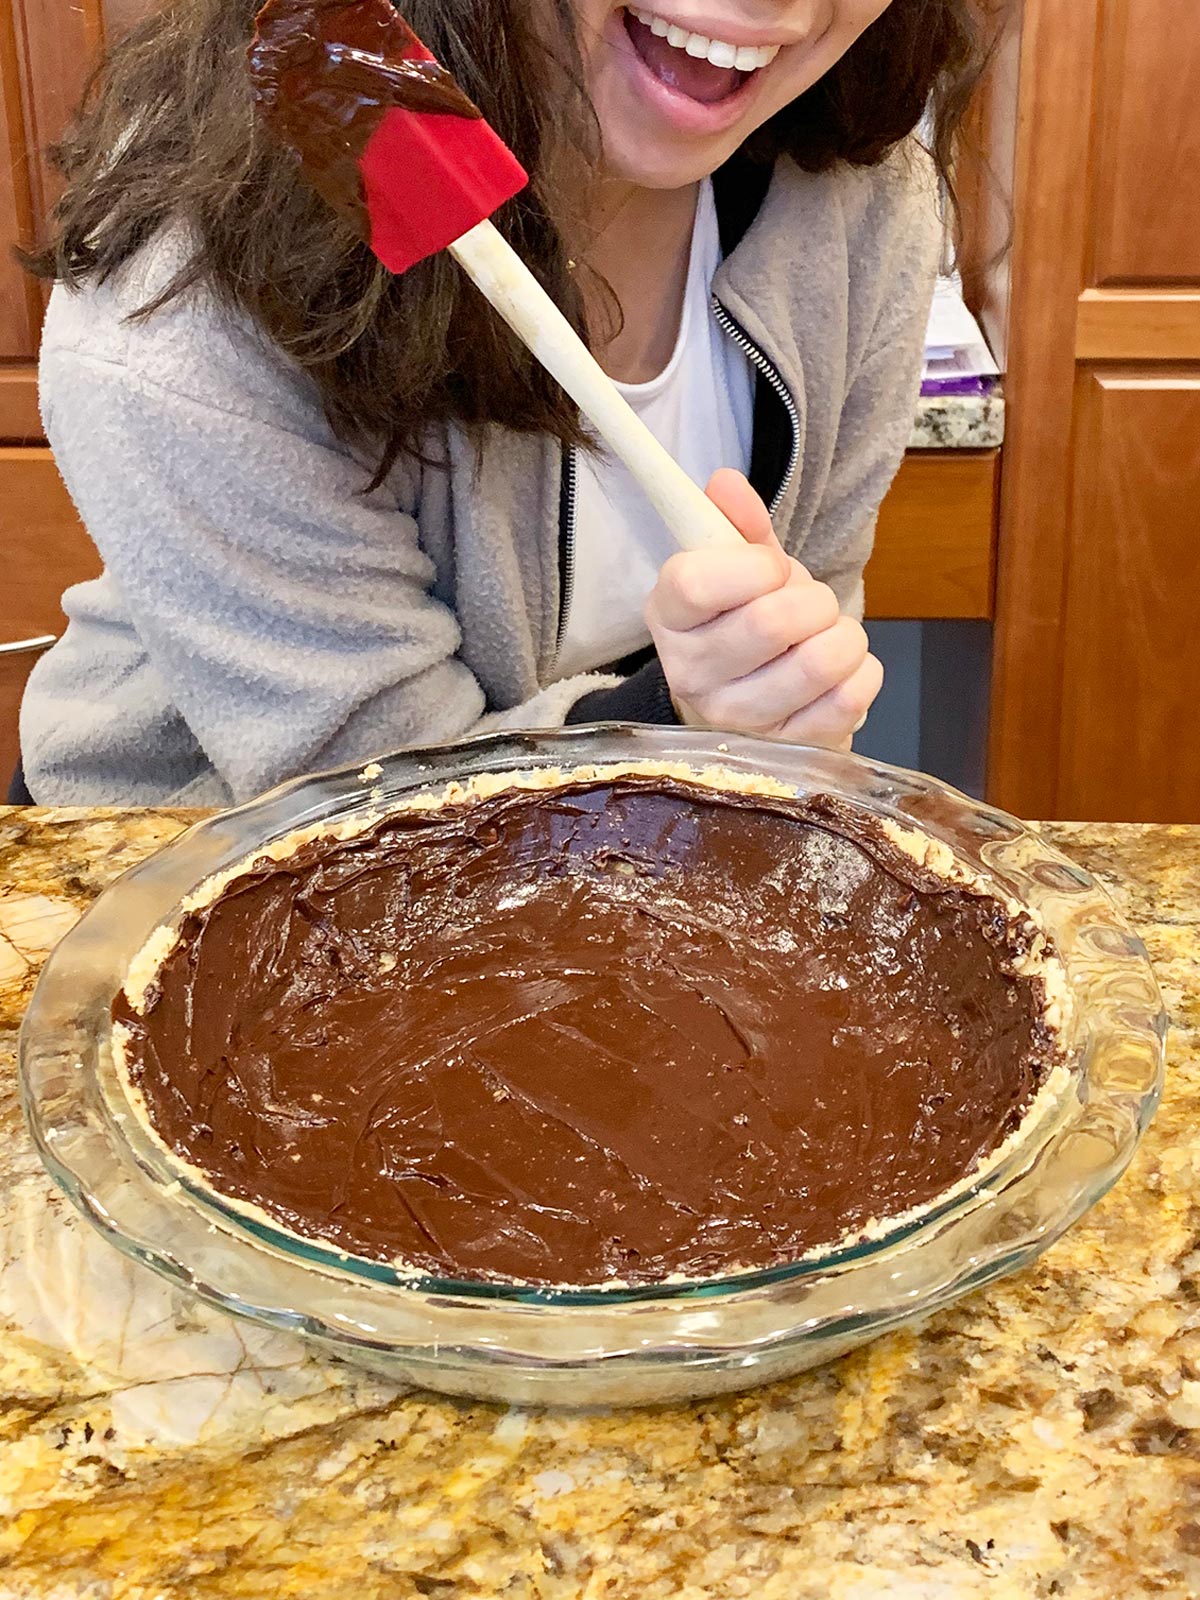 Beth's daughter holding a red spatula after she spread the chocolate lining on the cooled crust.